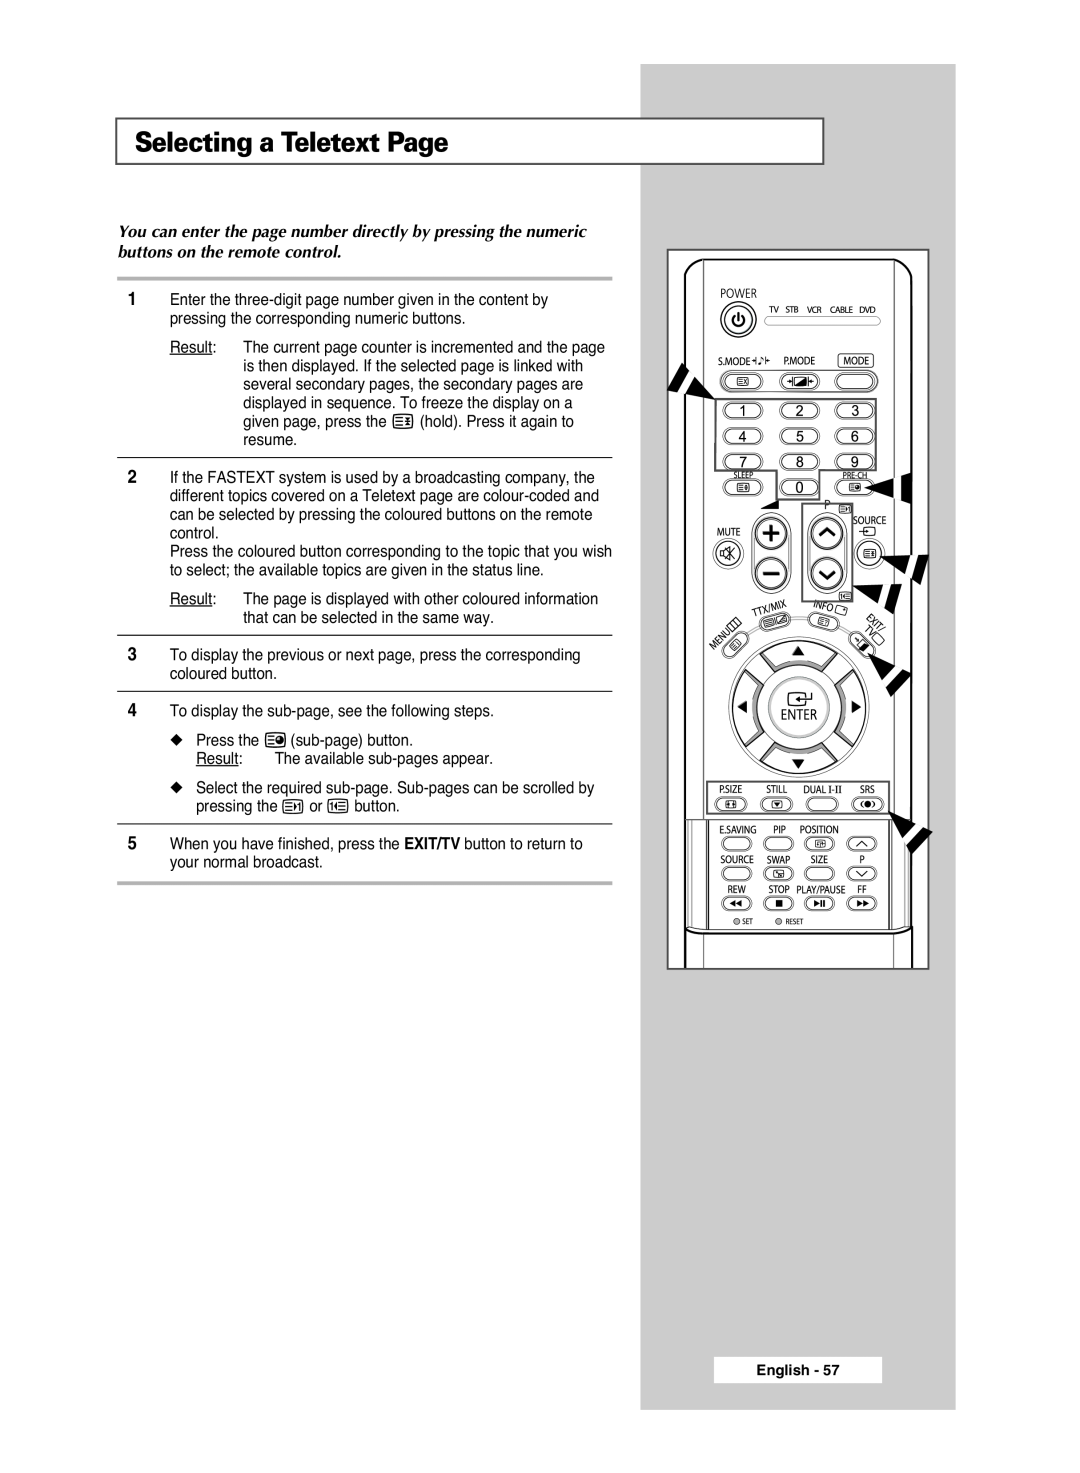 Samsung PS-42S5S manual Selecting a Teletext Page 